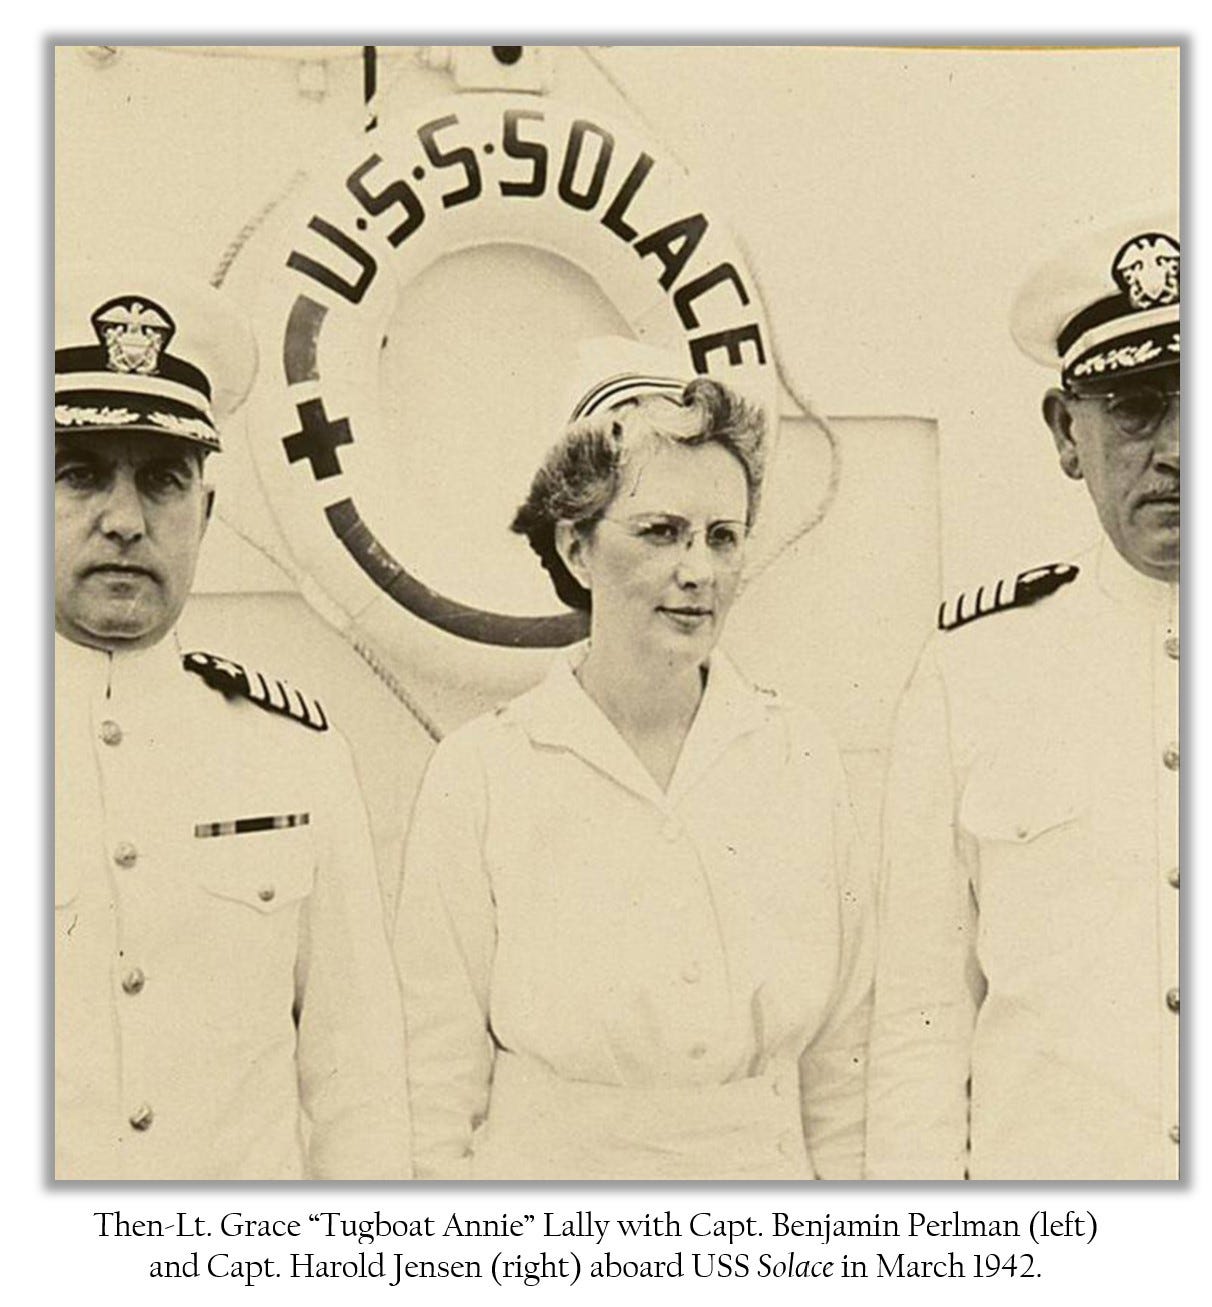 Then-Lt. Grace “Tugboat Annie” Lally with Capt. Benjamin Perlman (left) and Capt. Harold Jensen (right) aboard USS Solace in March 1942.